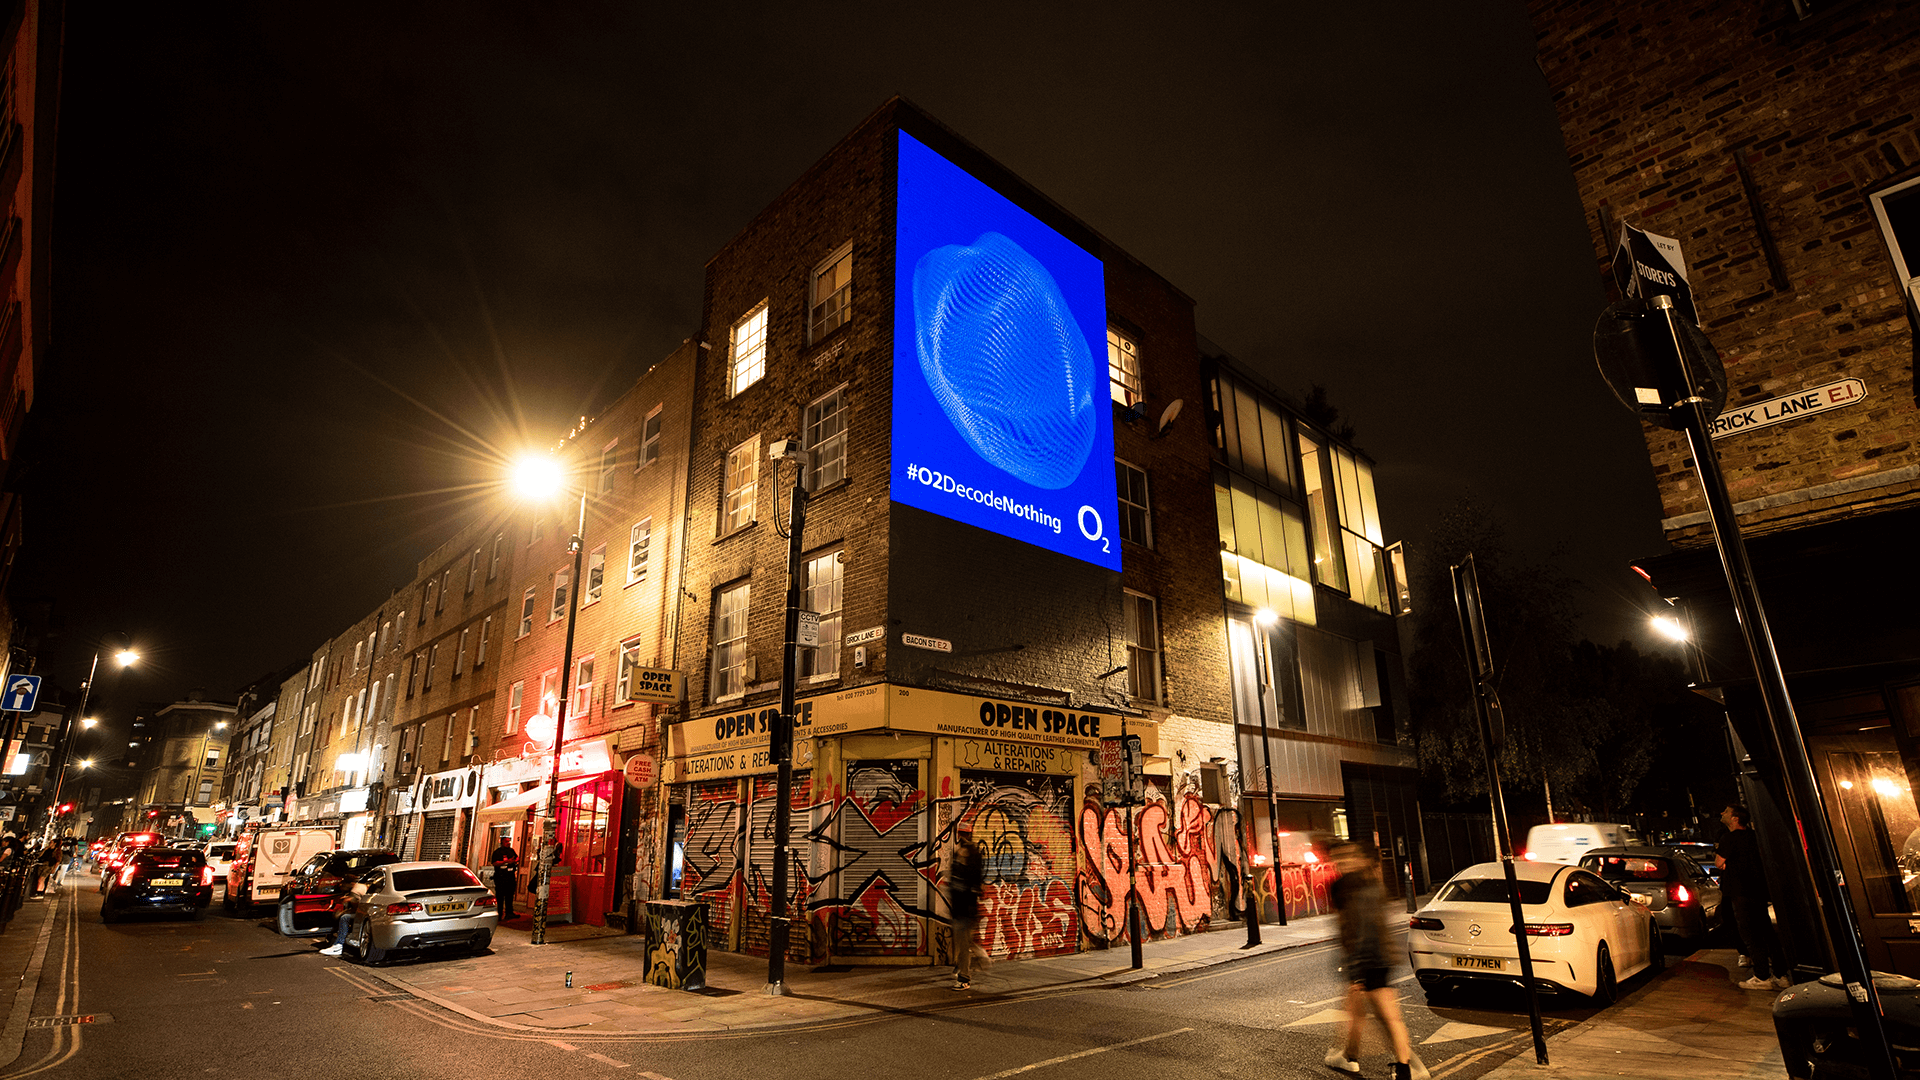 A light billboard with #O2DecodeNothing on it